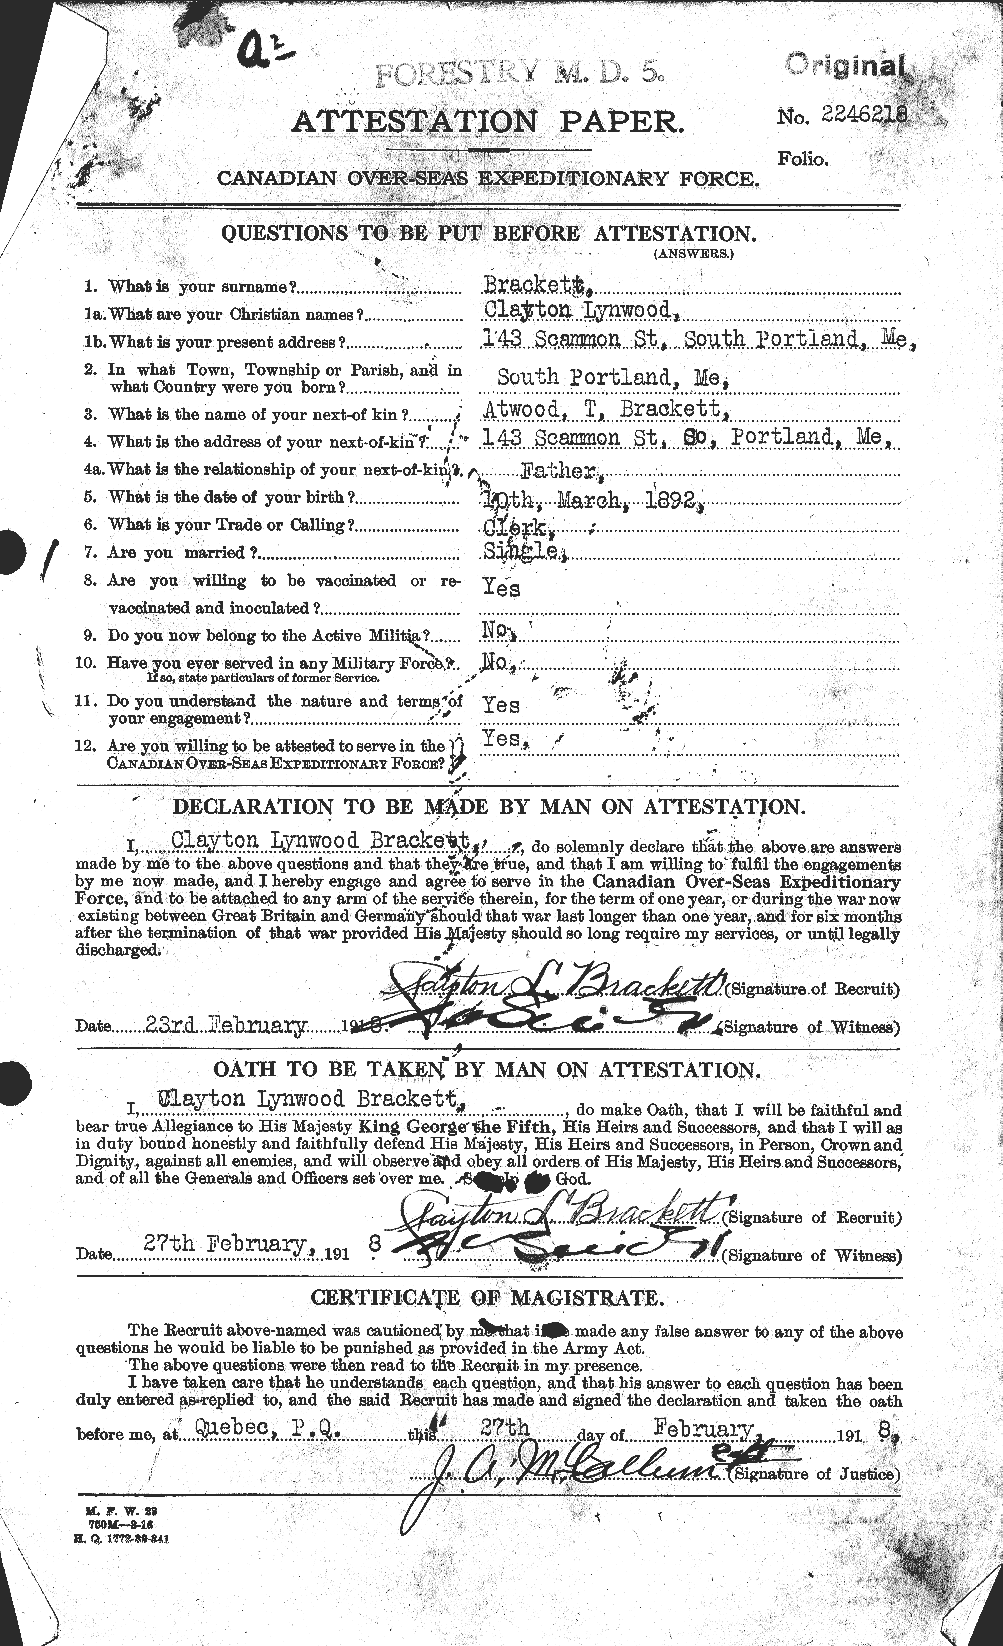 Personnel Records of the First World War - CEF 254729a